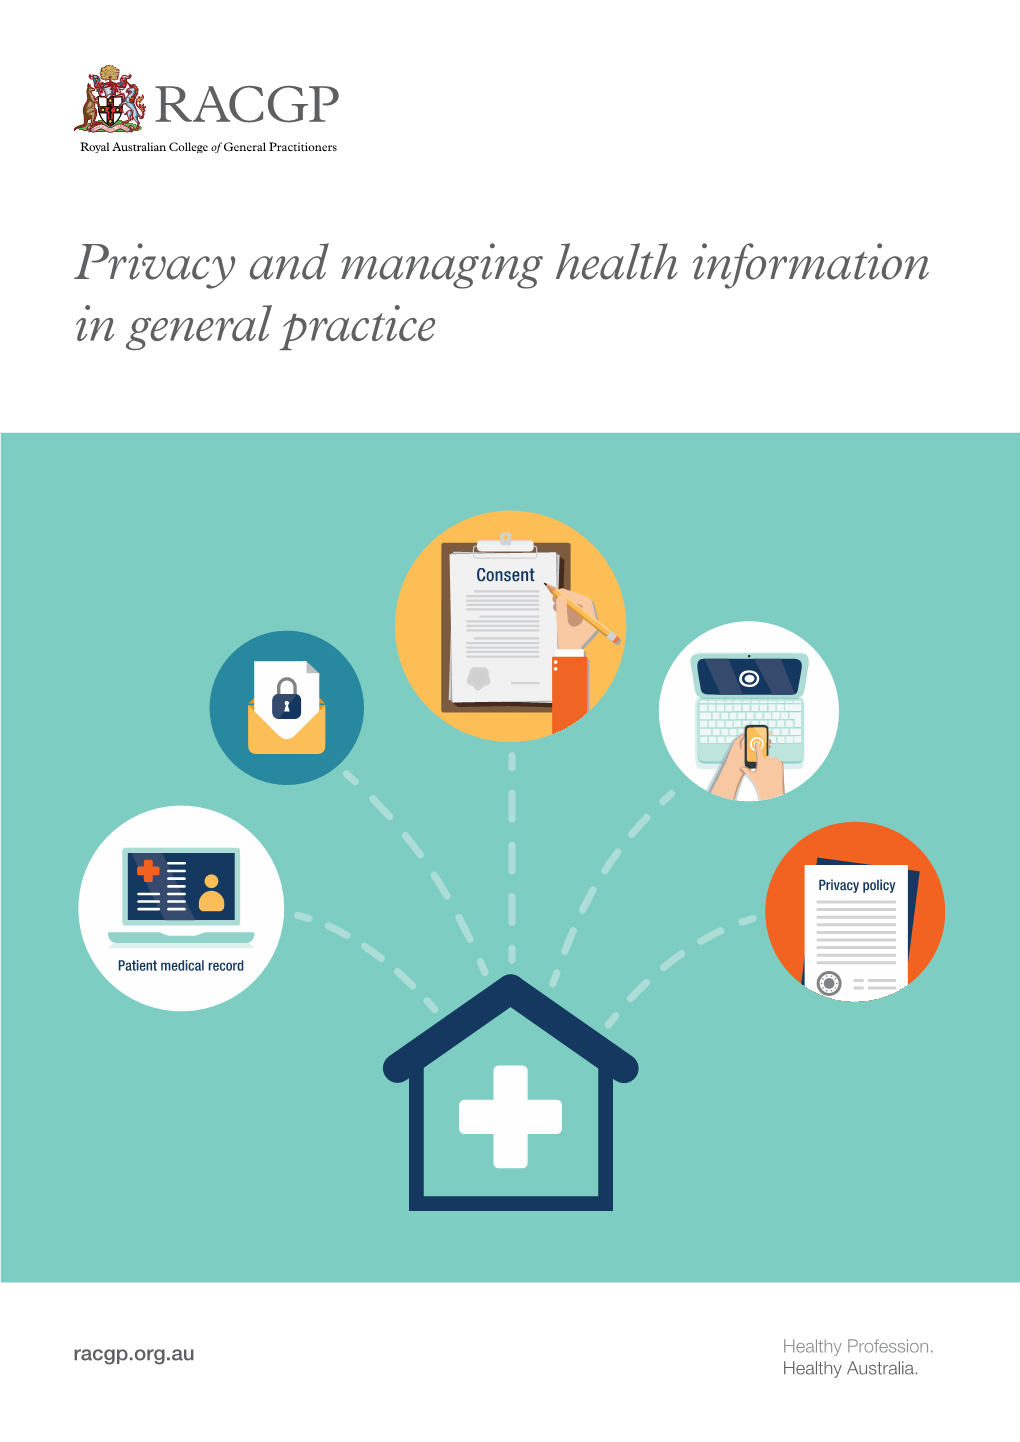 RACGP Privacy and Managing Health Information in General Practice